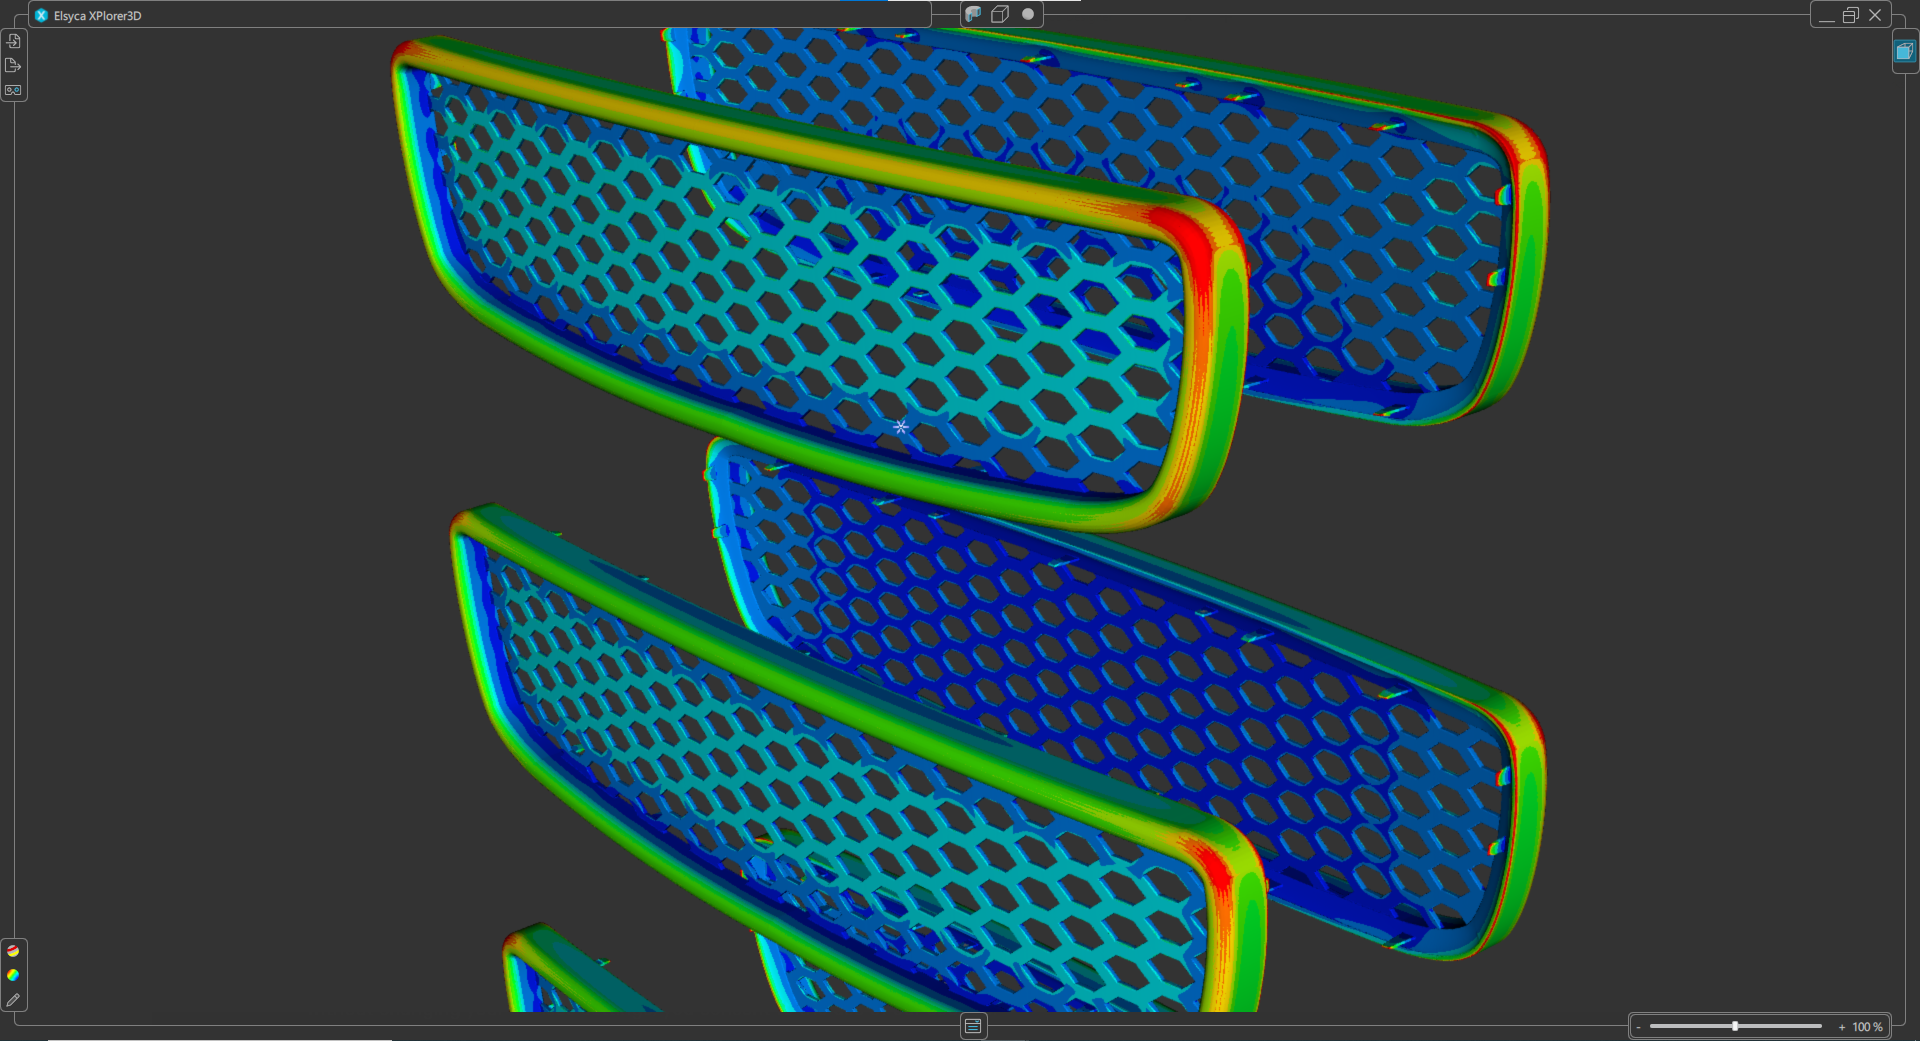 PoP simulation results - Car front grill